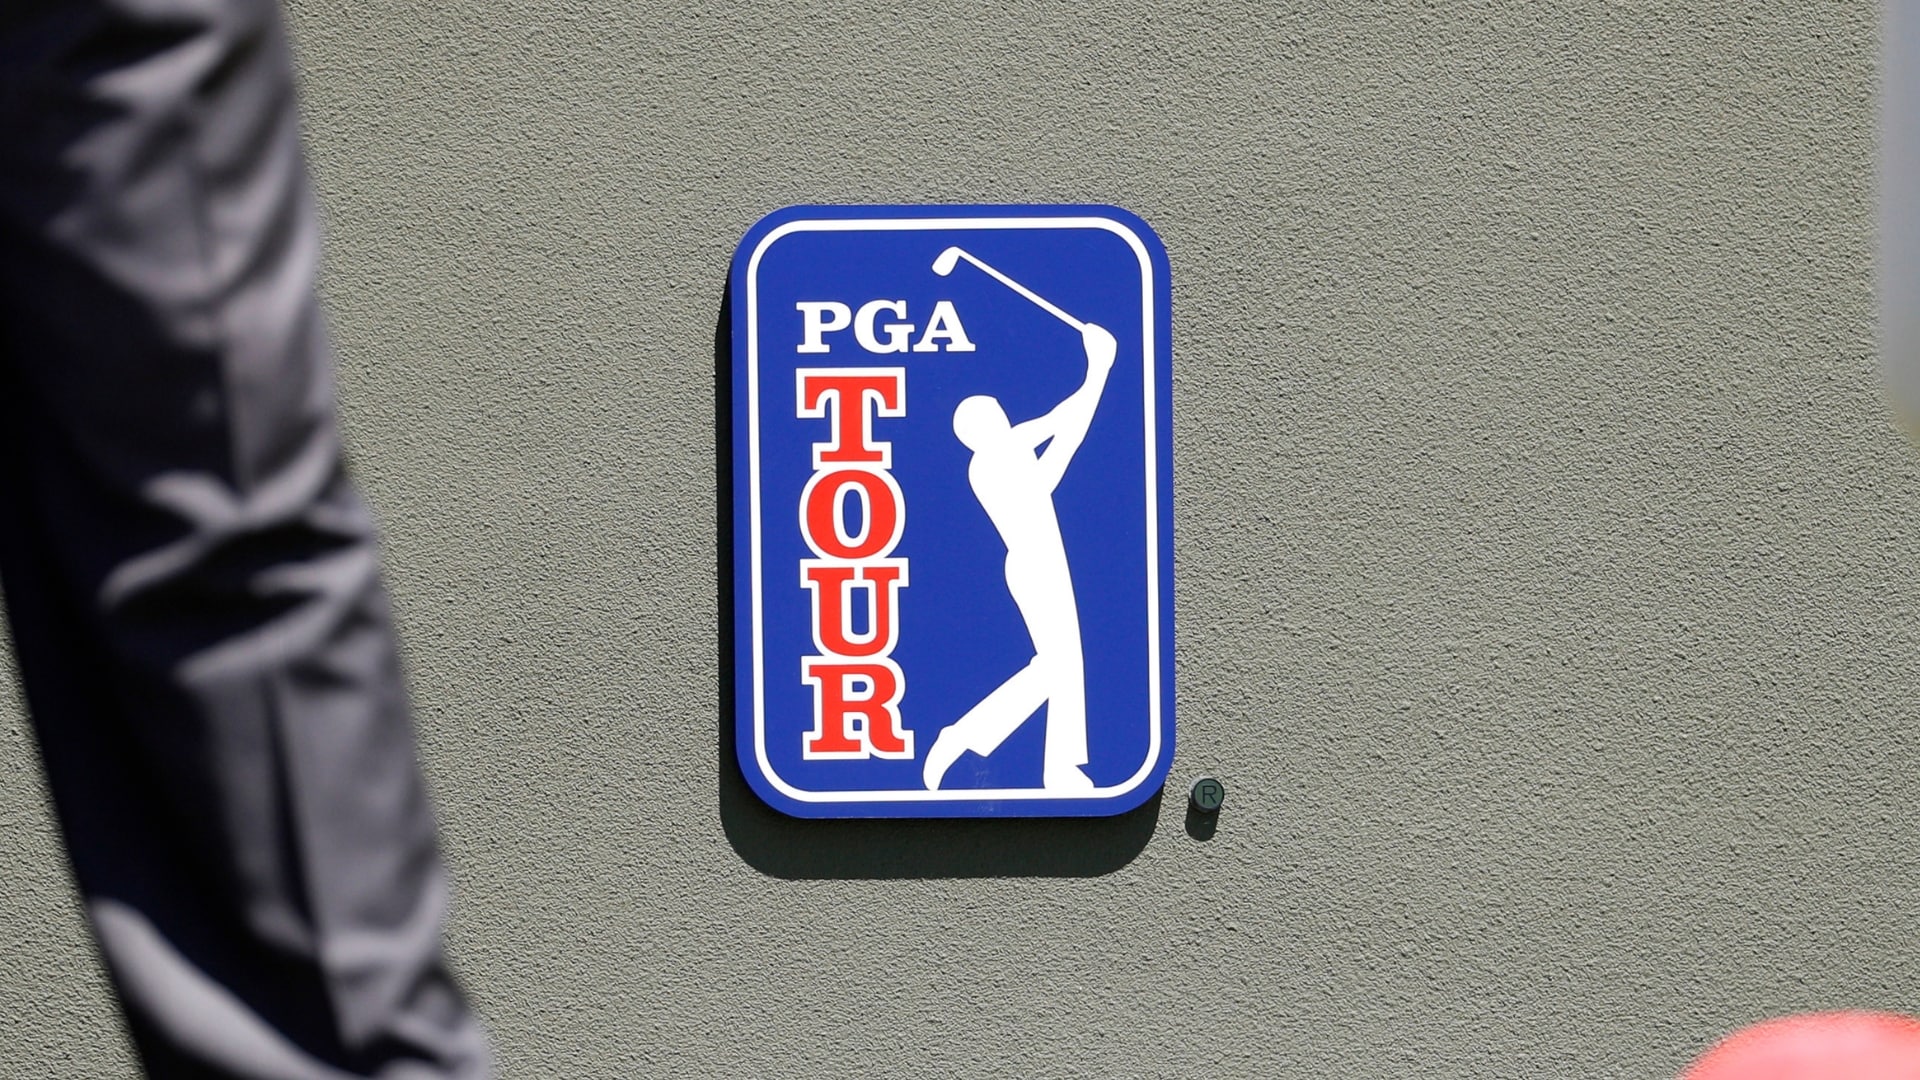 In Senate Preview, PGA Tour Chief Operating Officer Ron Price Admits Mishandling Of Deal Rollout